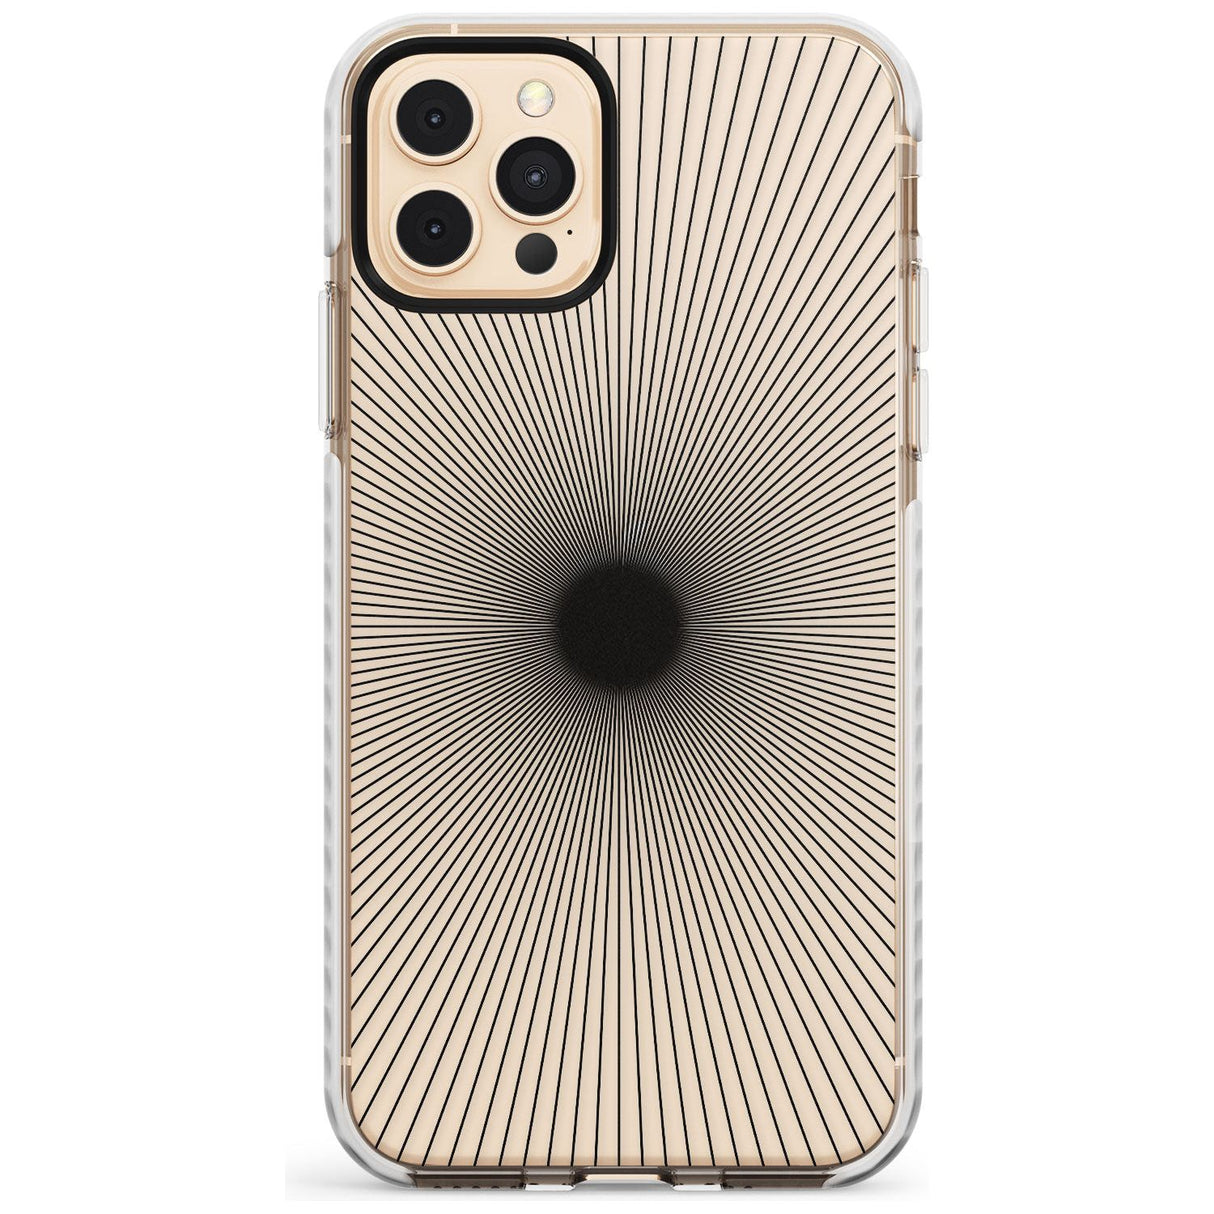 Abstract Lines: Sunburst Slim TPU Phone Case for iPhone 11 Pro Max